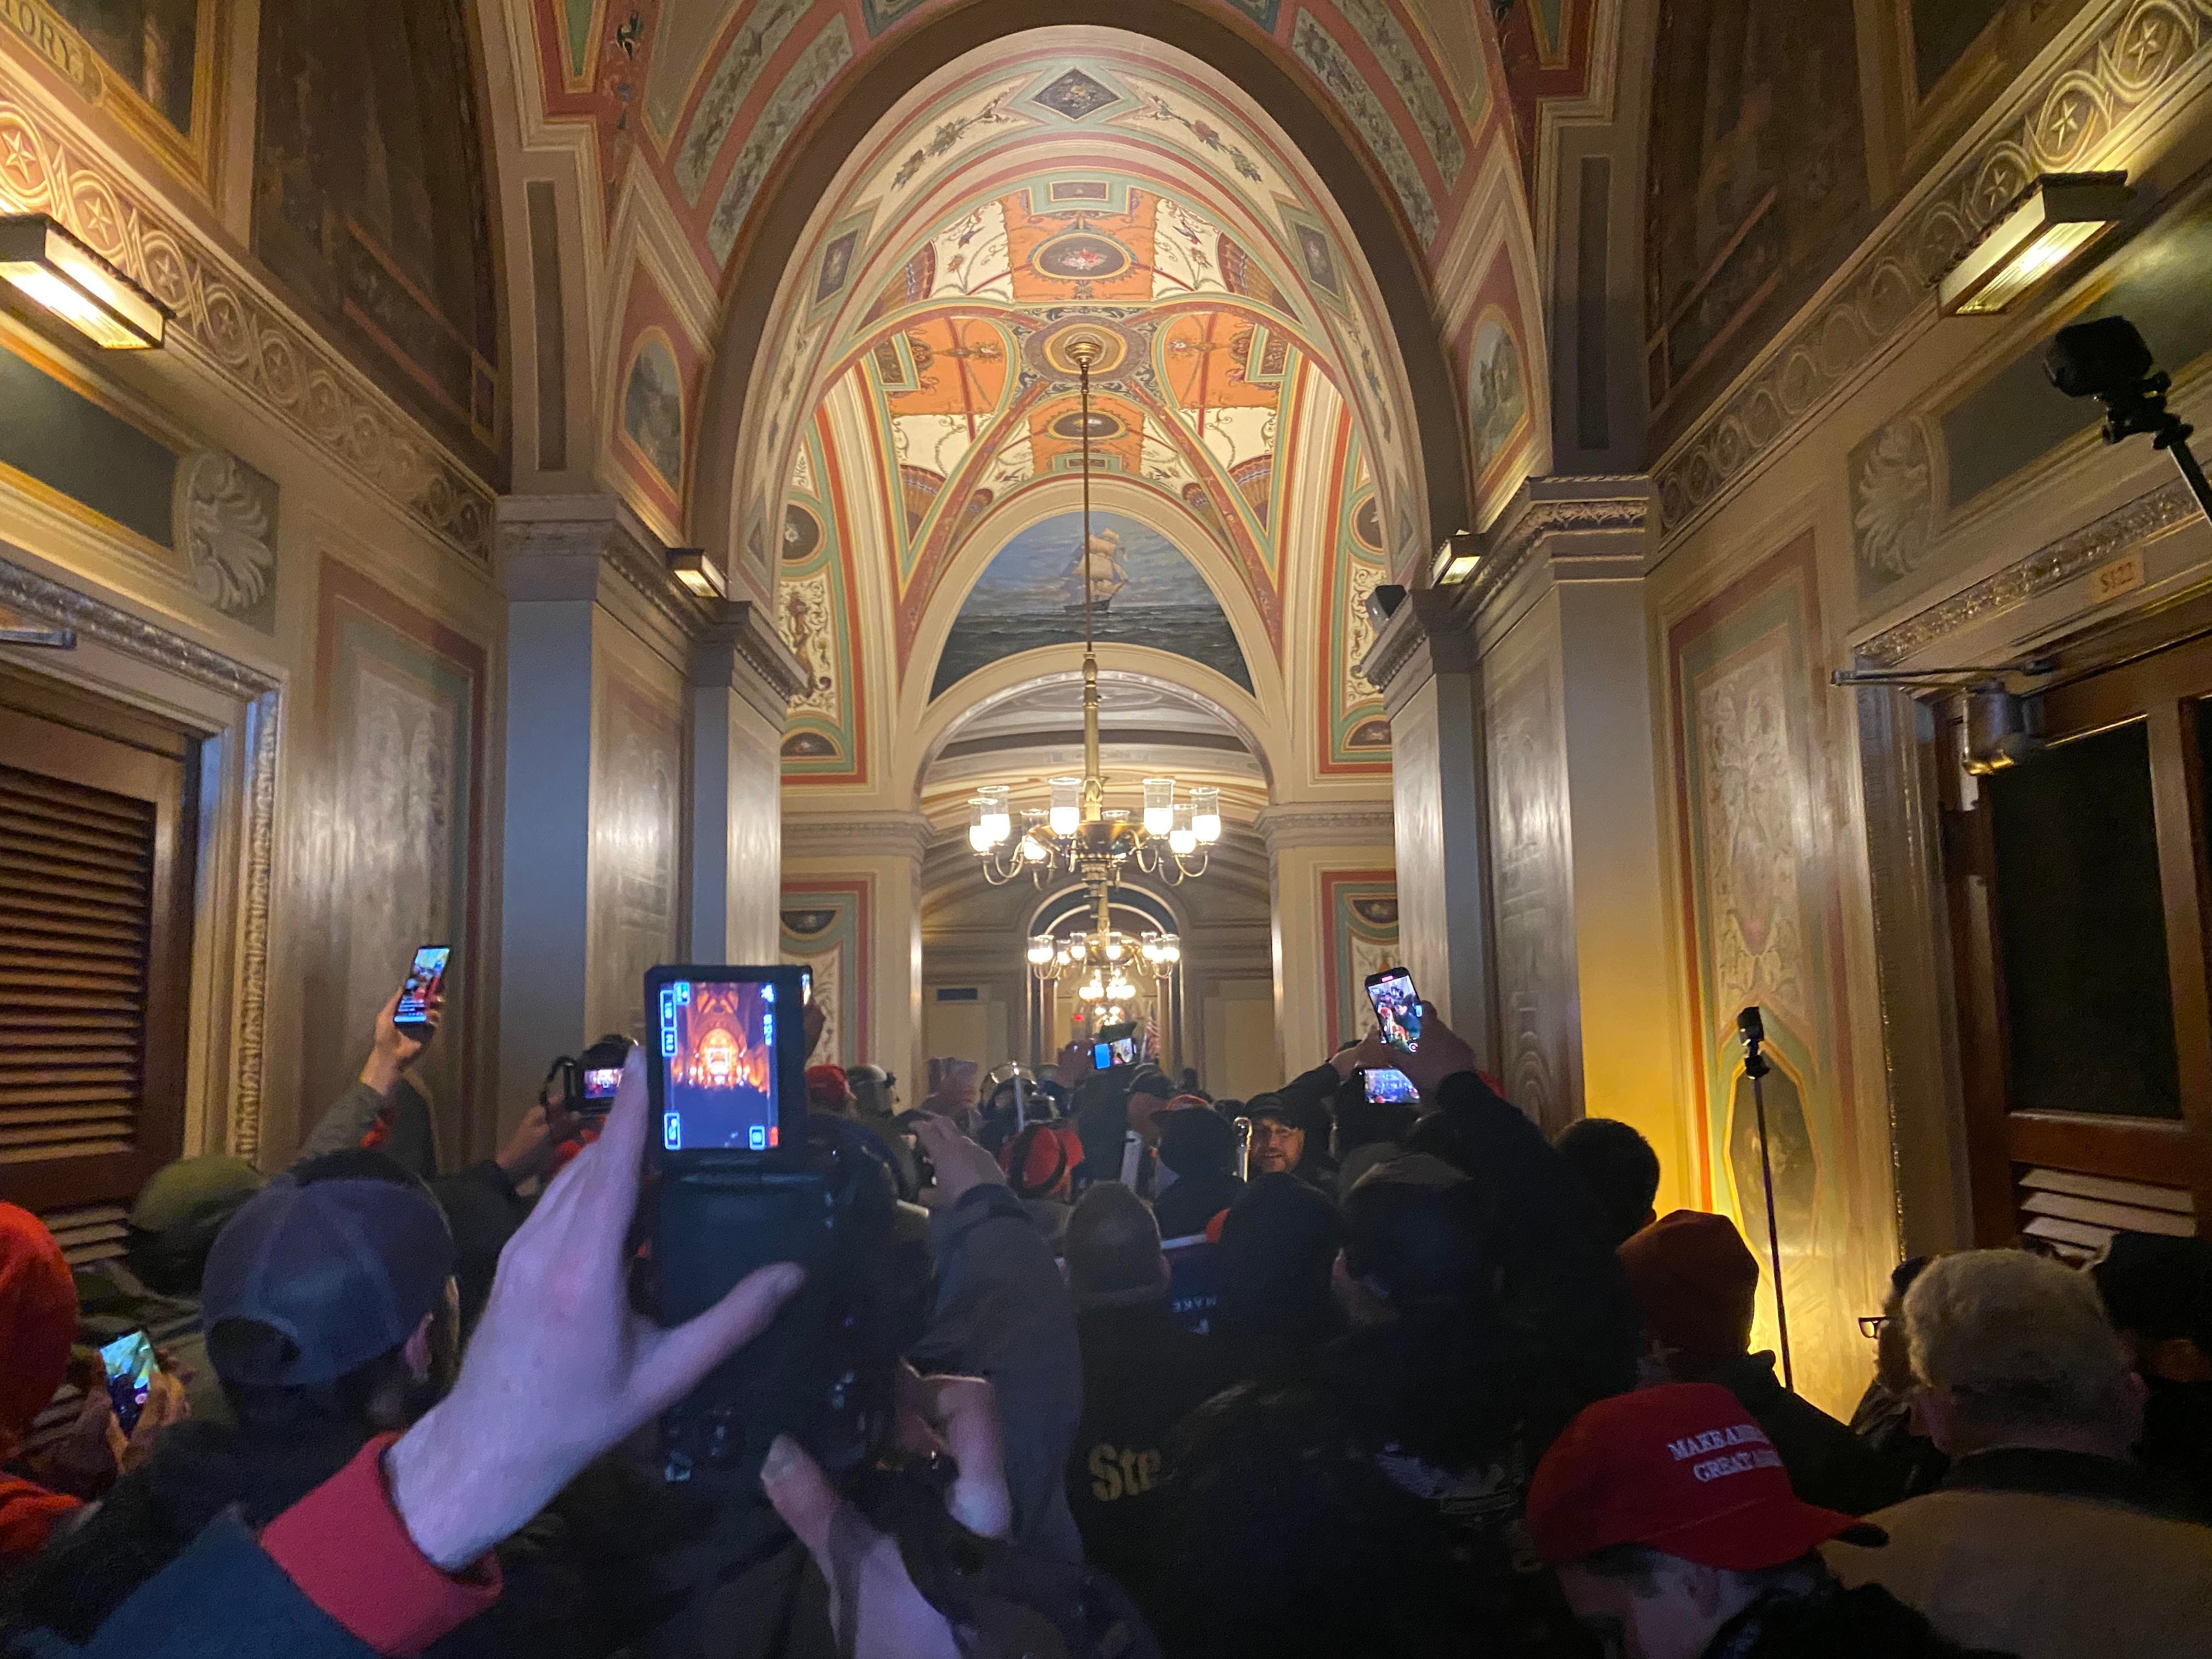 Protesters storm the Capitol building in Washington D.C.